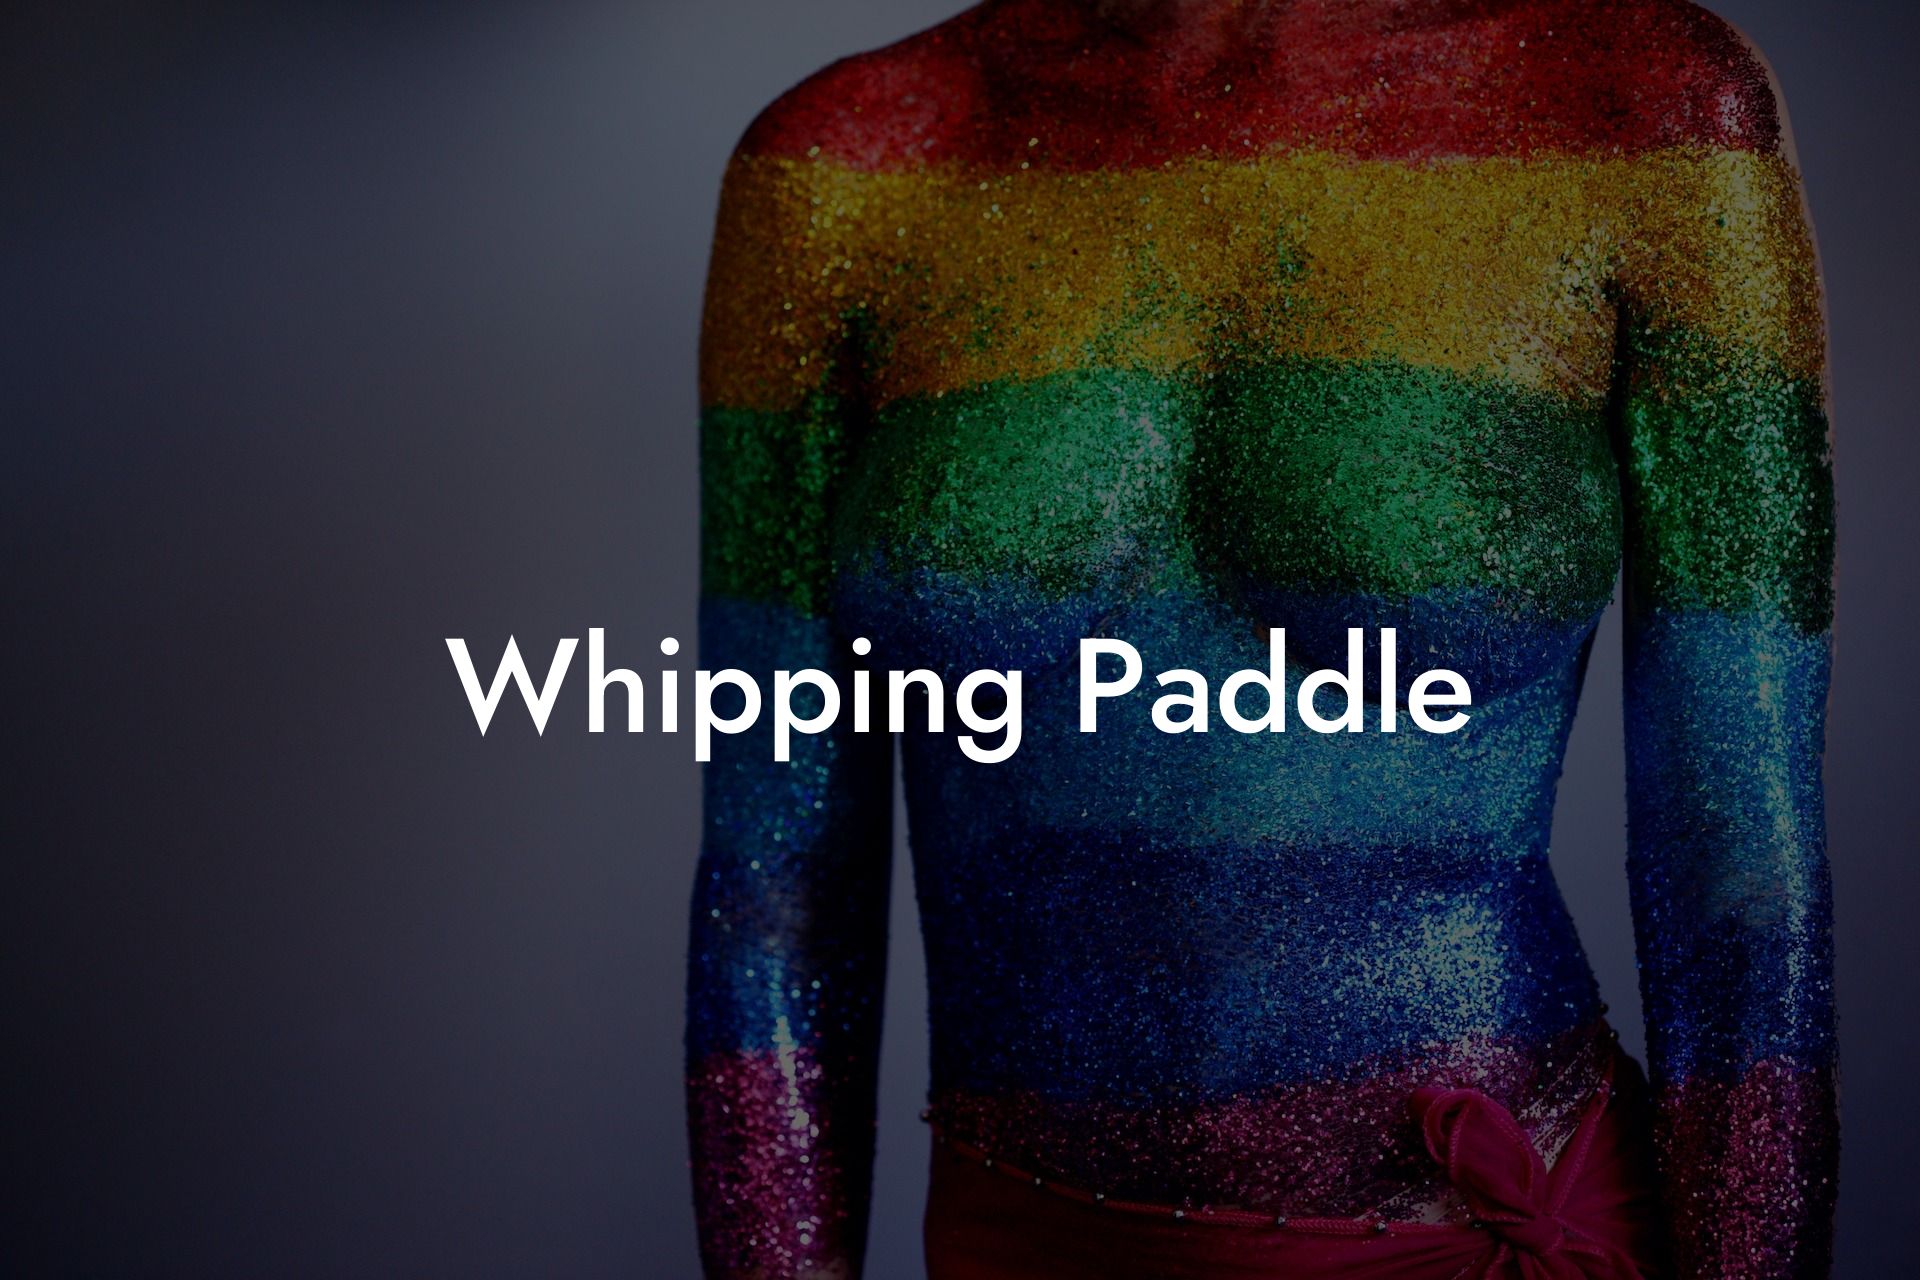 Whipping Paddle